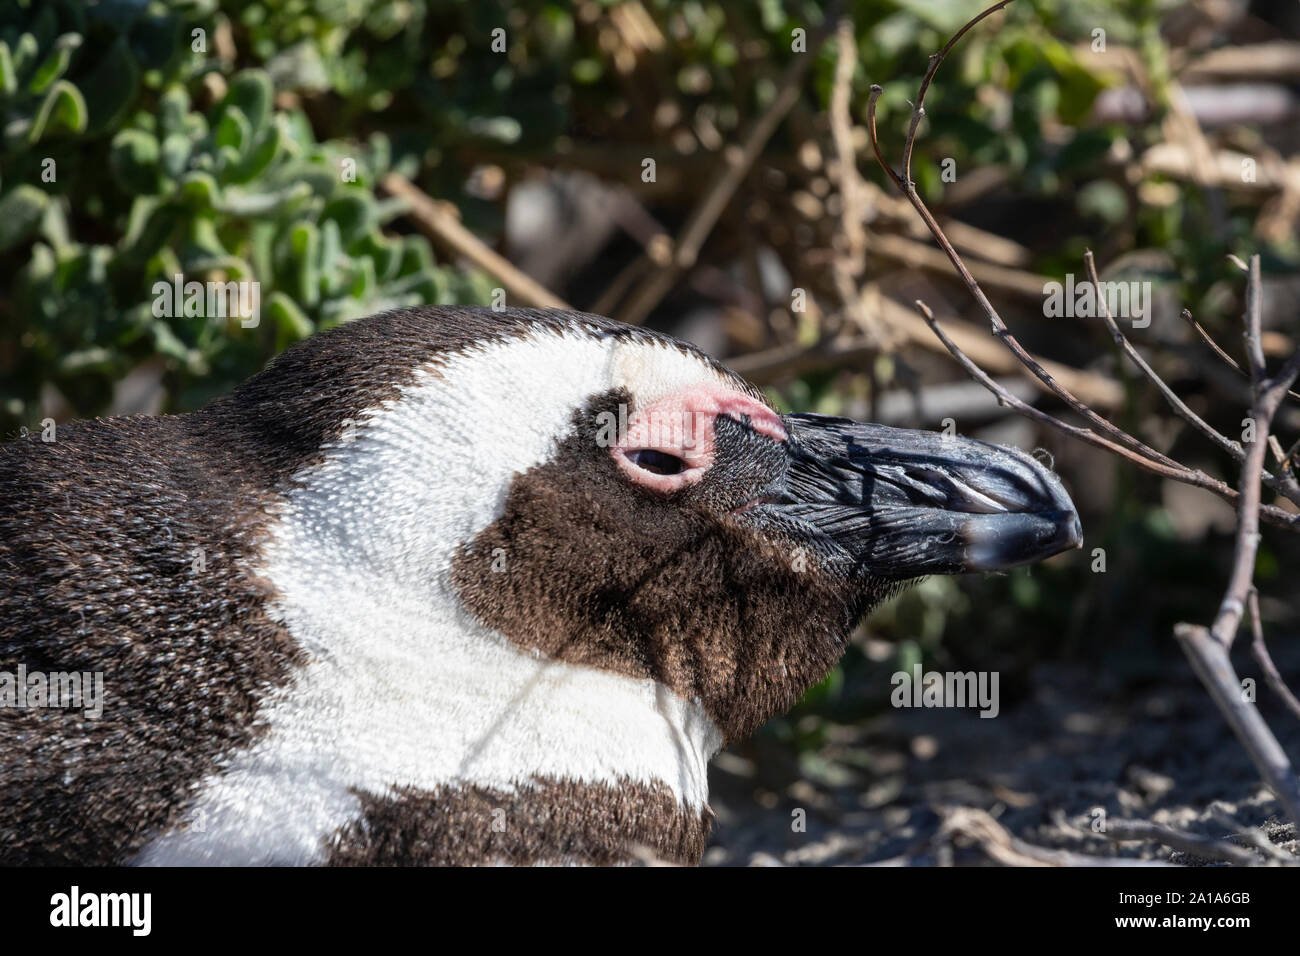 Endangered African Penguins (Spheniscus demersus), Boulders Beach, Table mountain Nature Reserve, Simonstown, South Africa. Close up head portrait Stock Photo